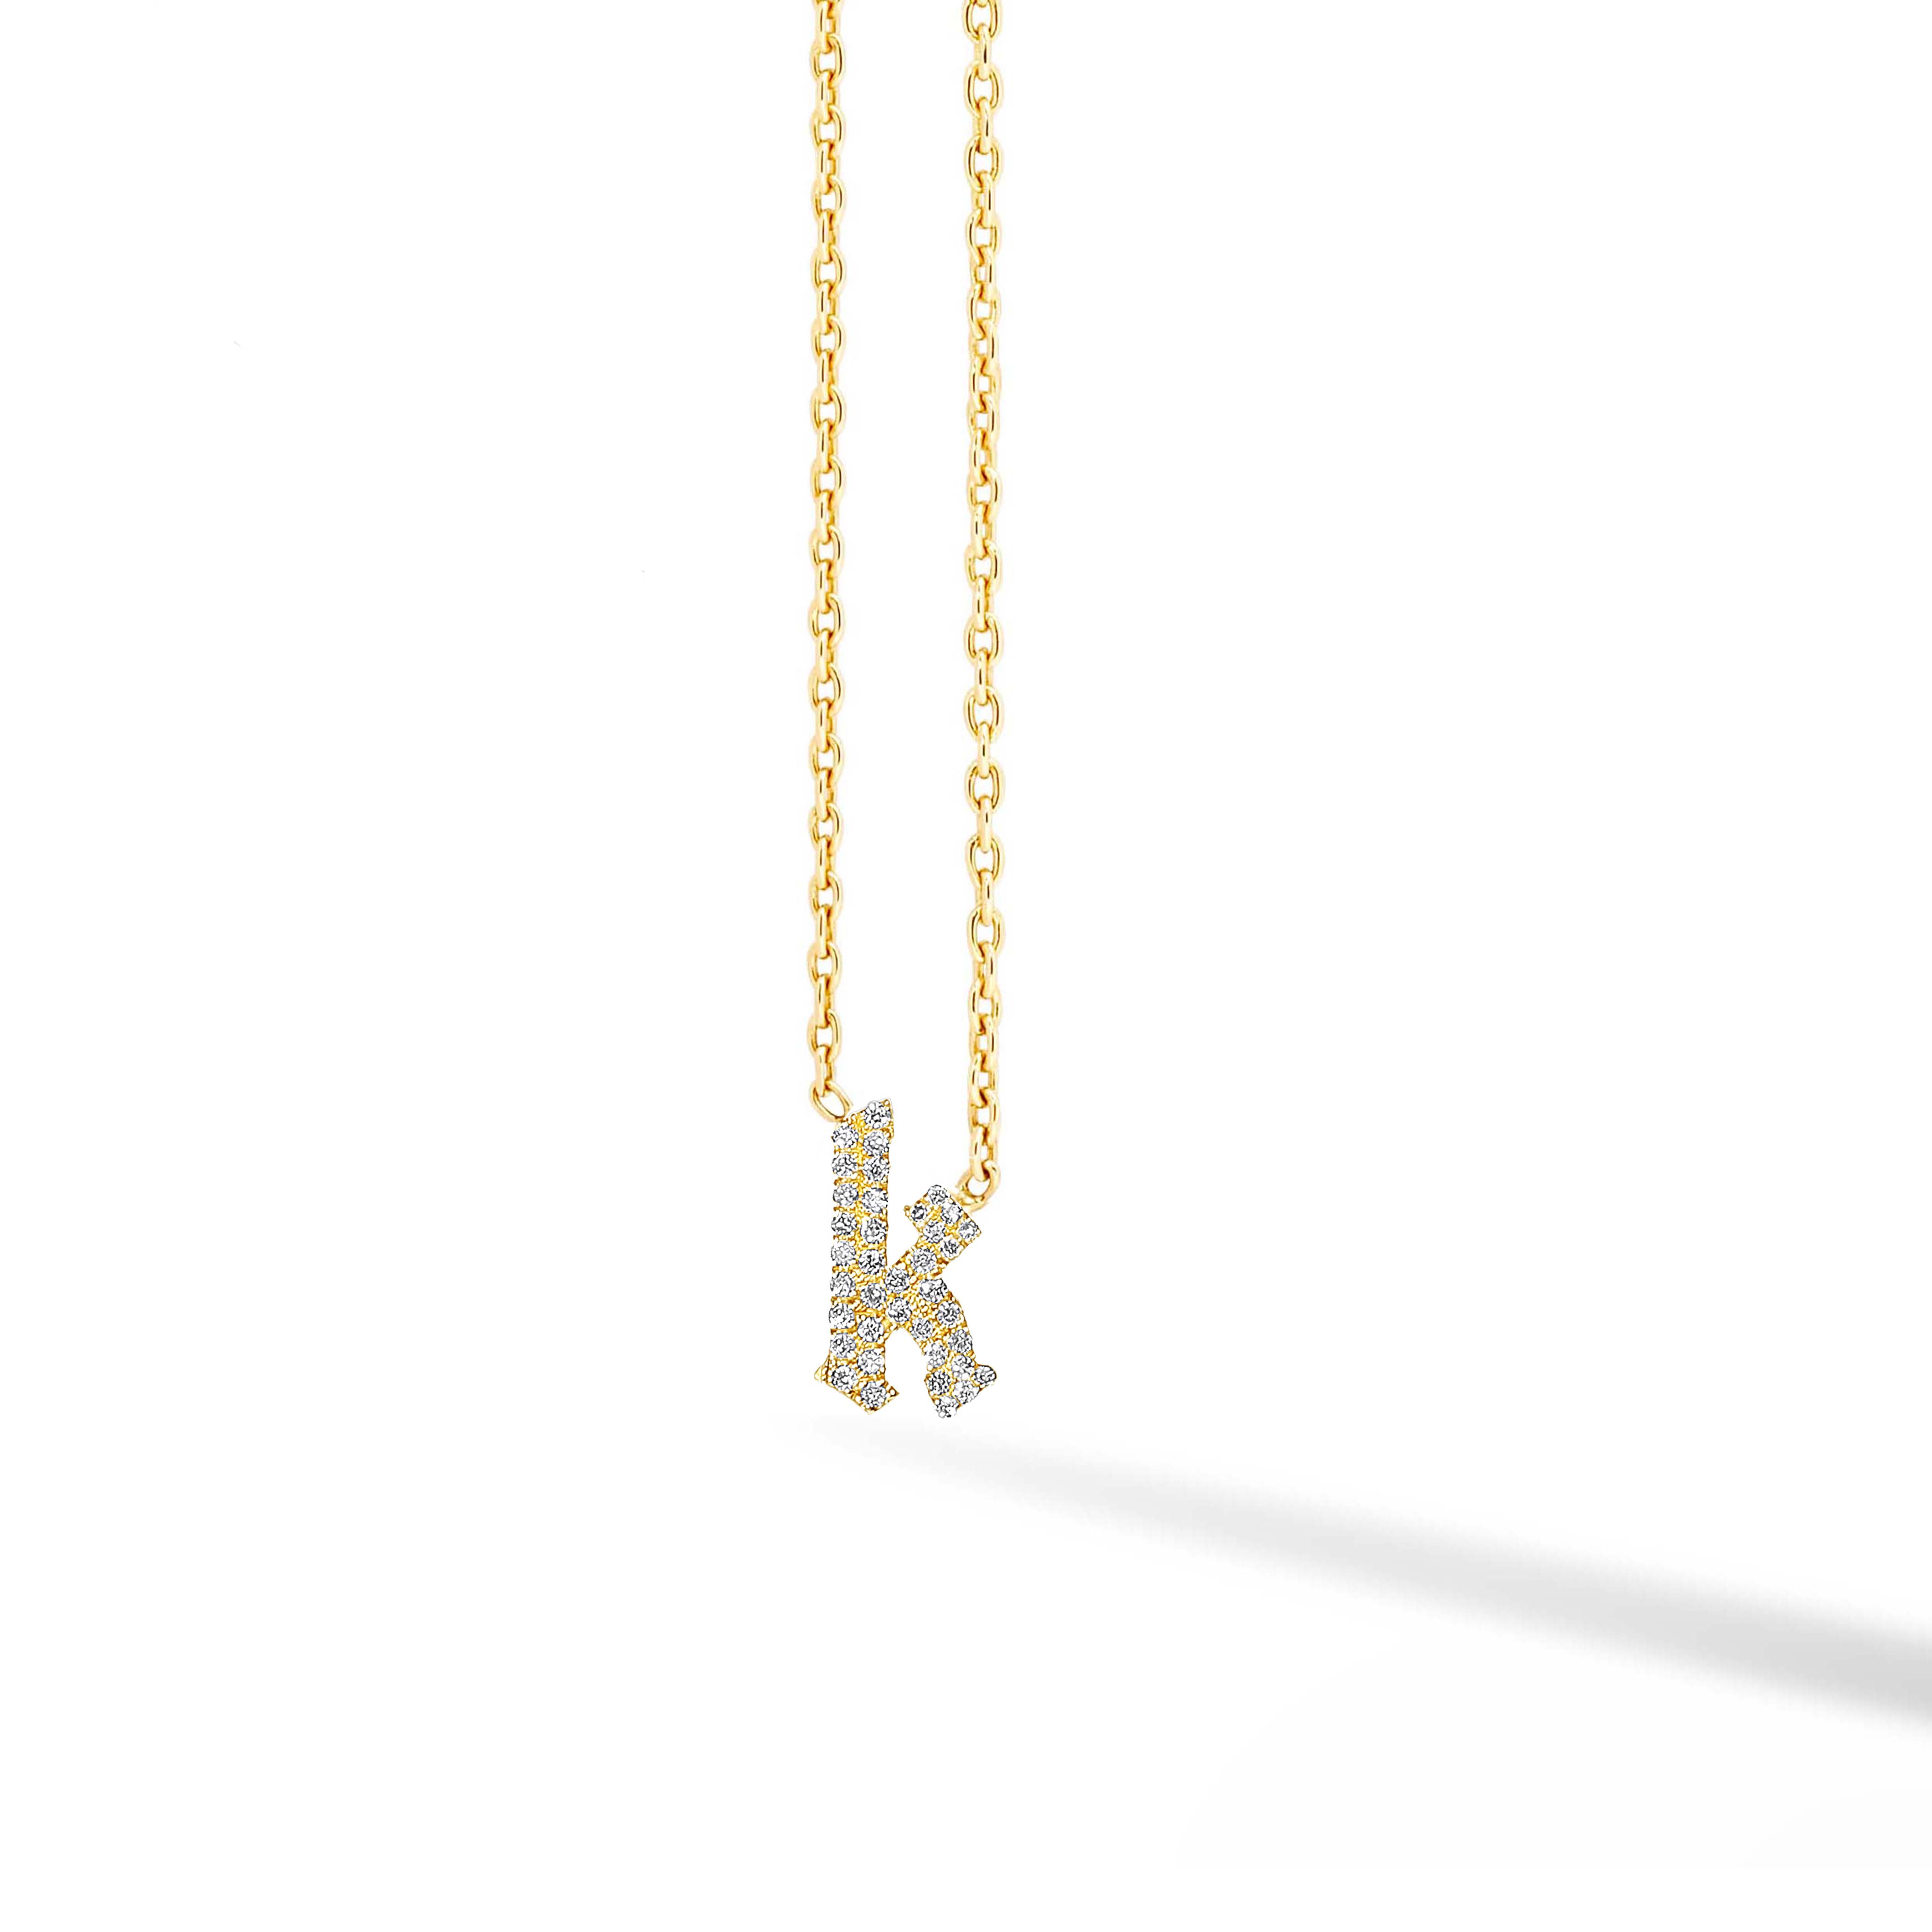 Pave Gothic Initial Necklace